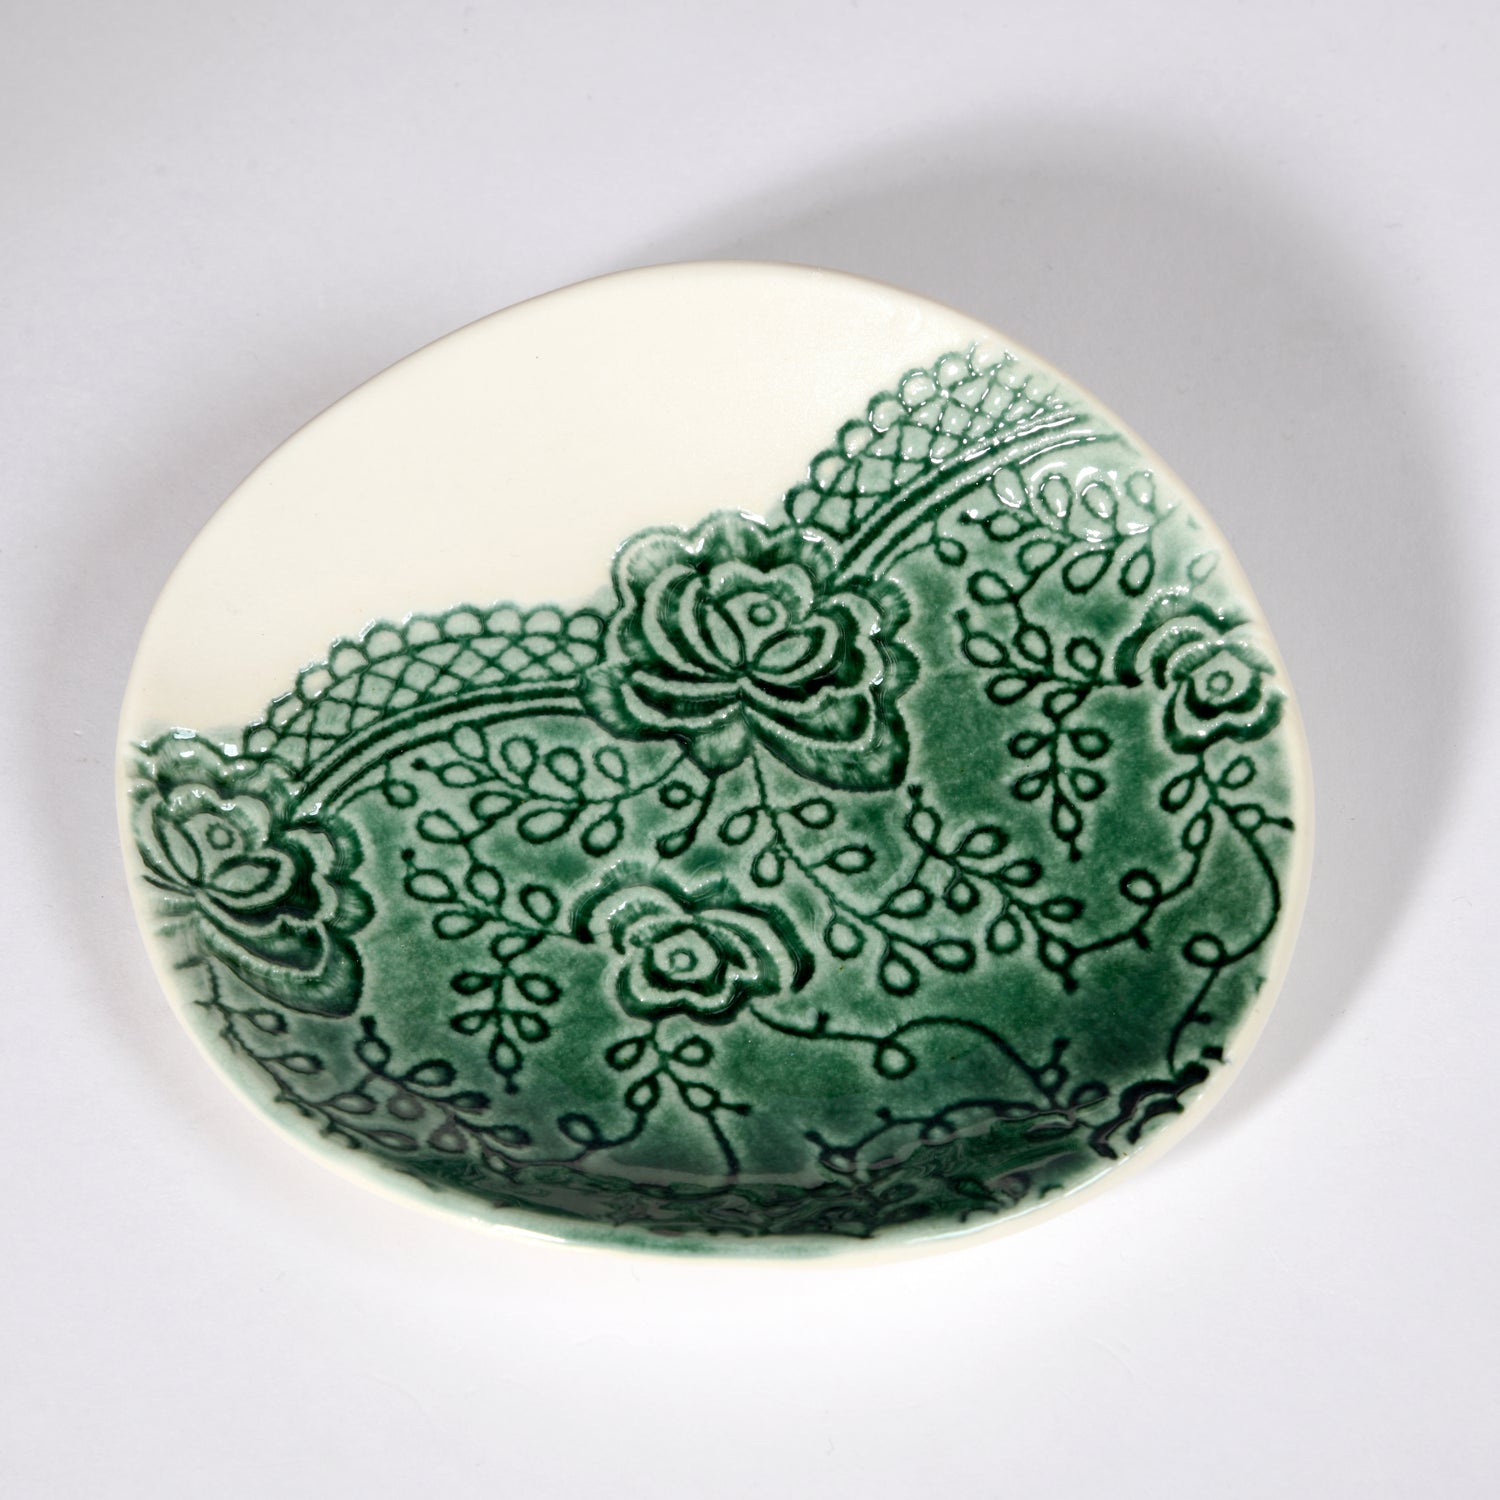 Dainty trinket plate with embossed lace detailing